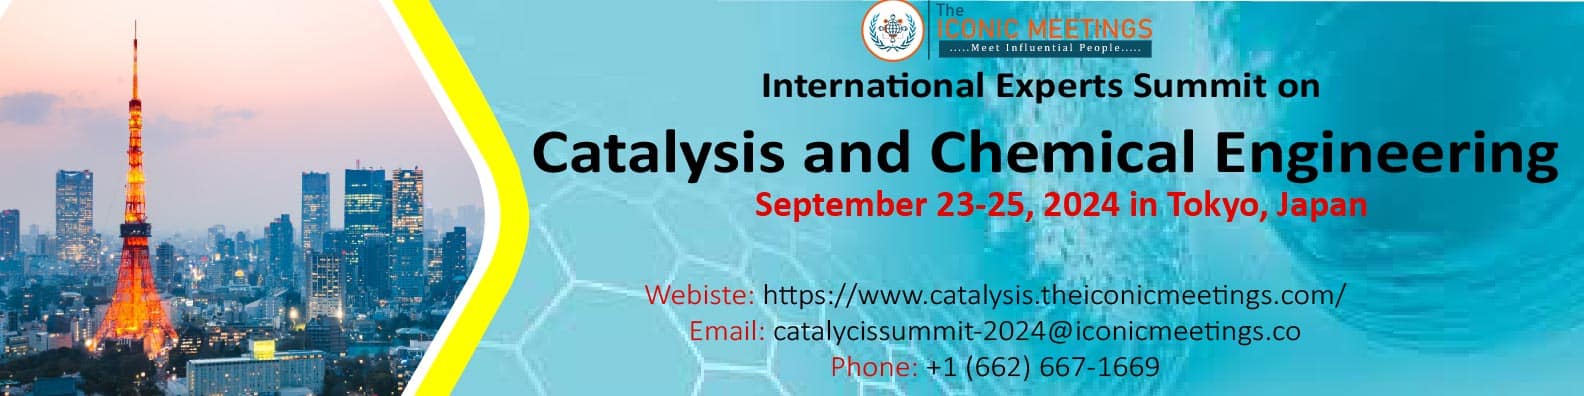 Global Summit Experts on Catalysis and Chemical Engineering